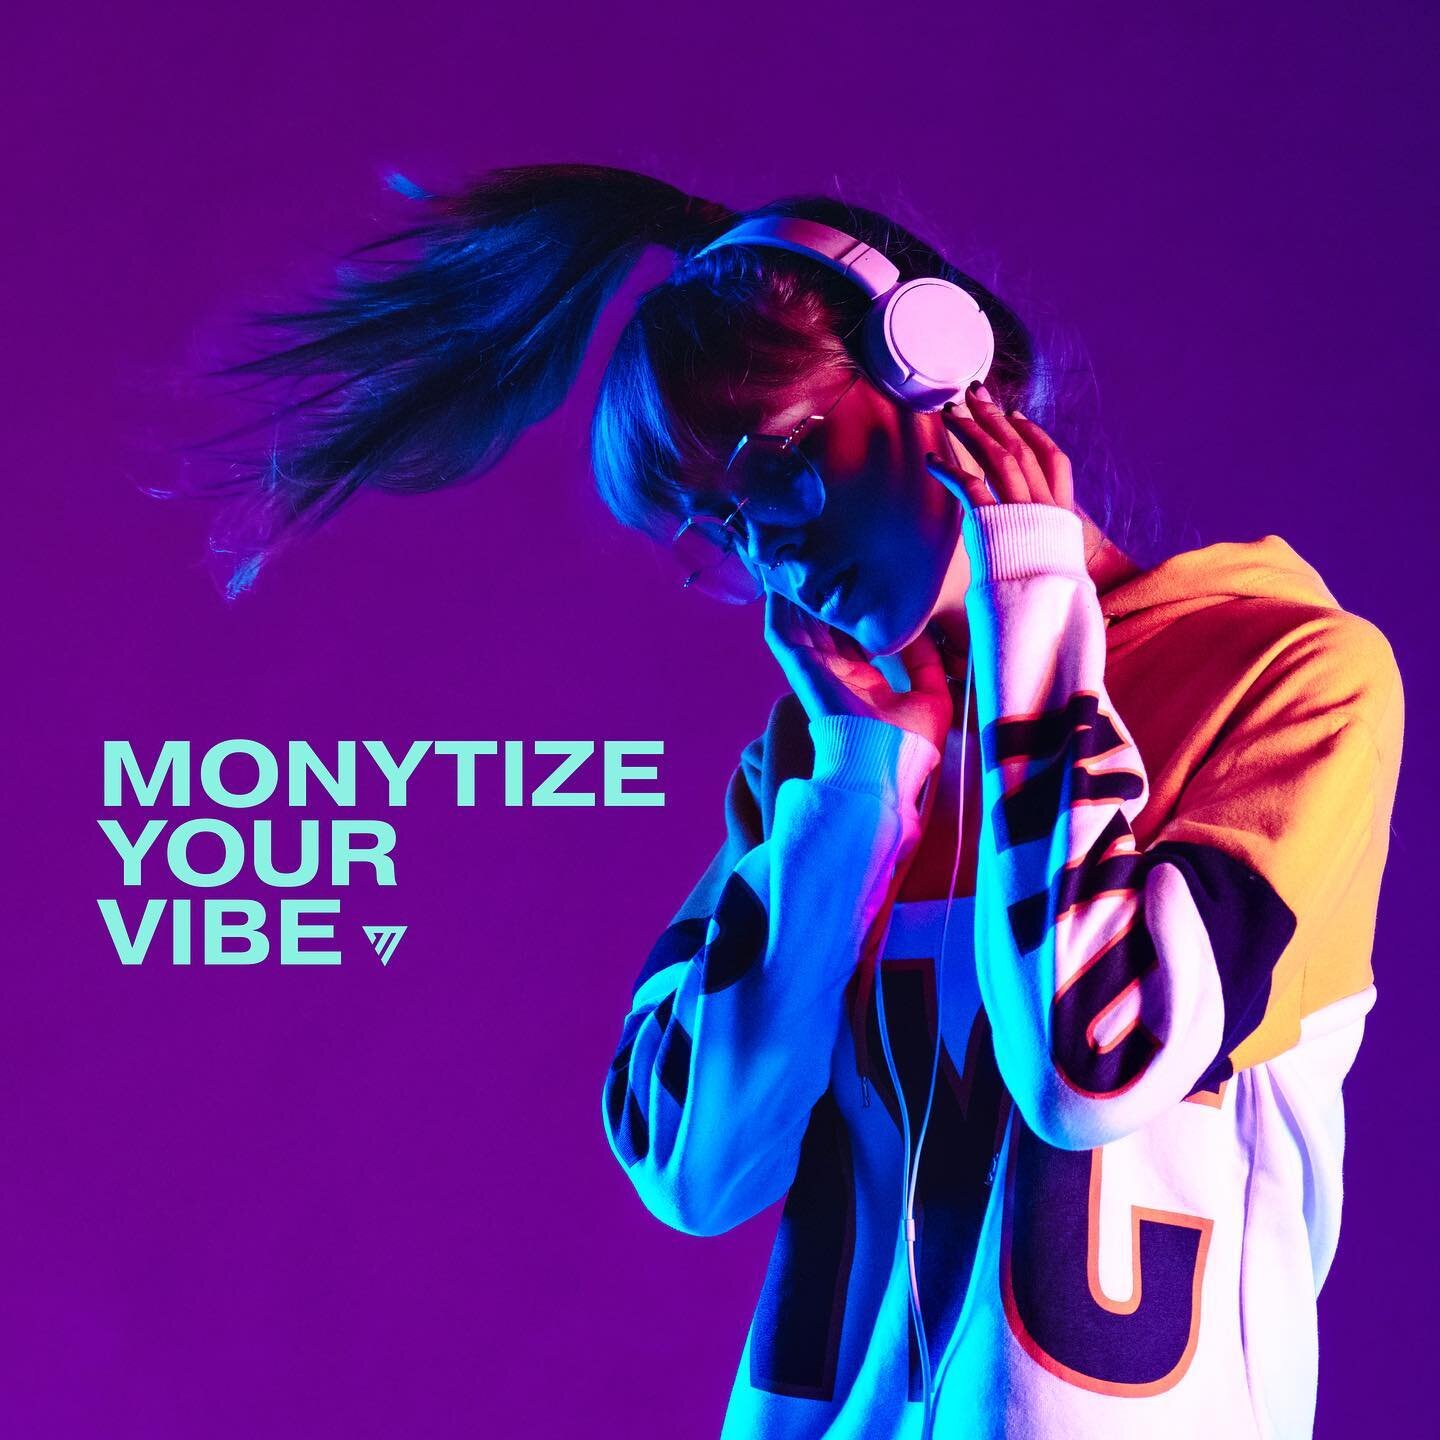 No matter who you are or what you do, you can &lsquo;monytize&rsquo; with us! Bring your vibe, and monytize it!

#monytize #monytizeapp #contentcreator #influencer